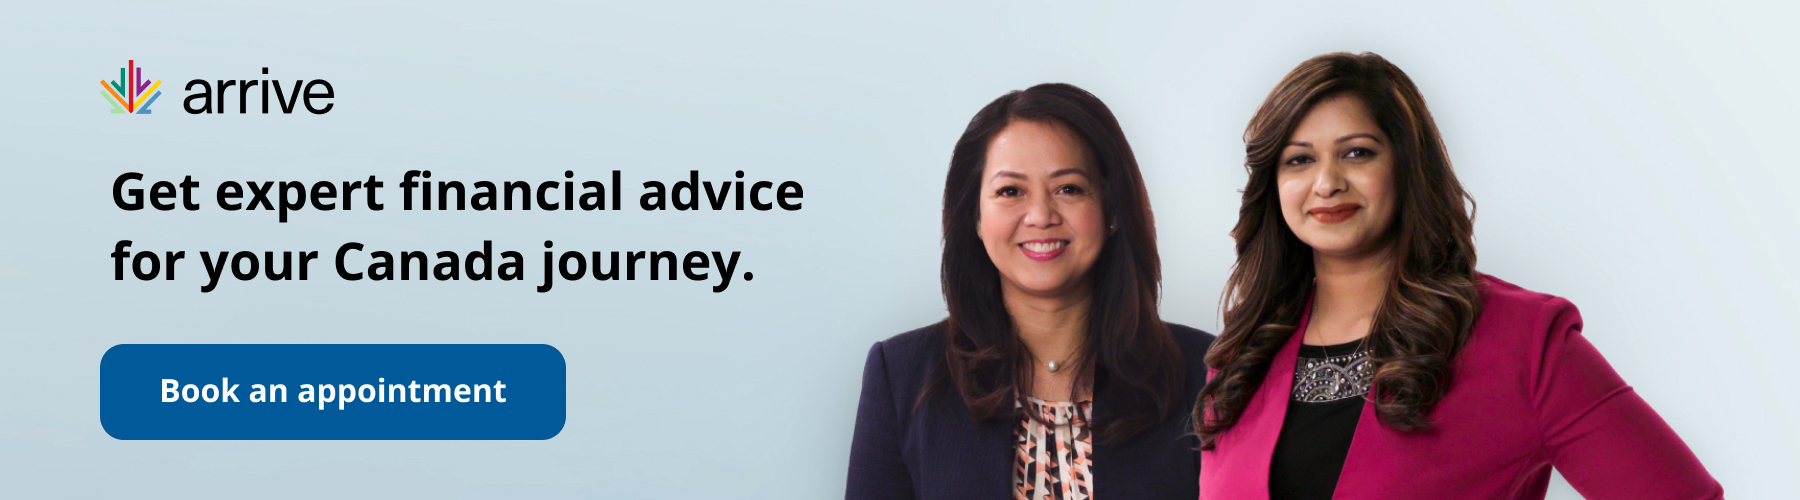 Book an appointment to speak with a financial advisor